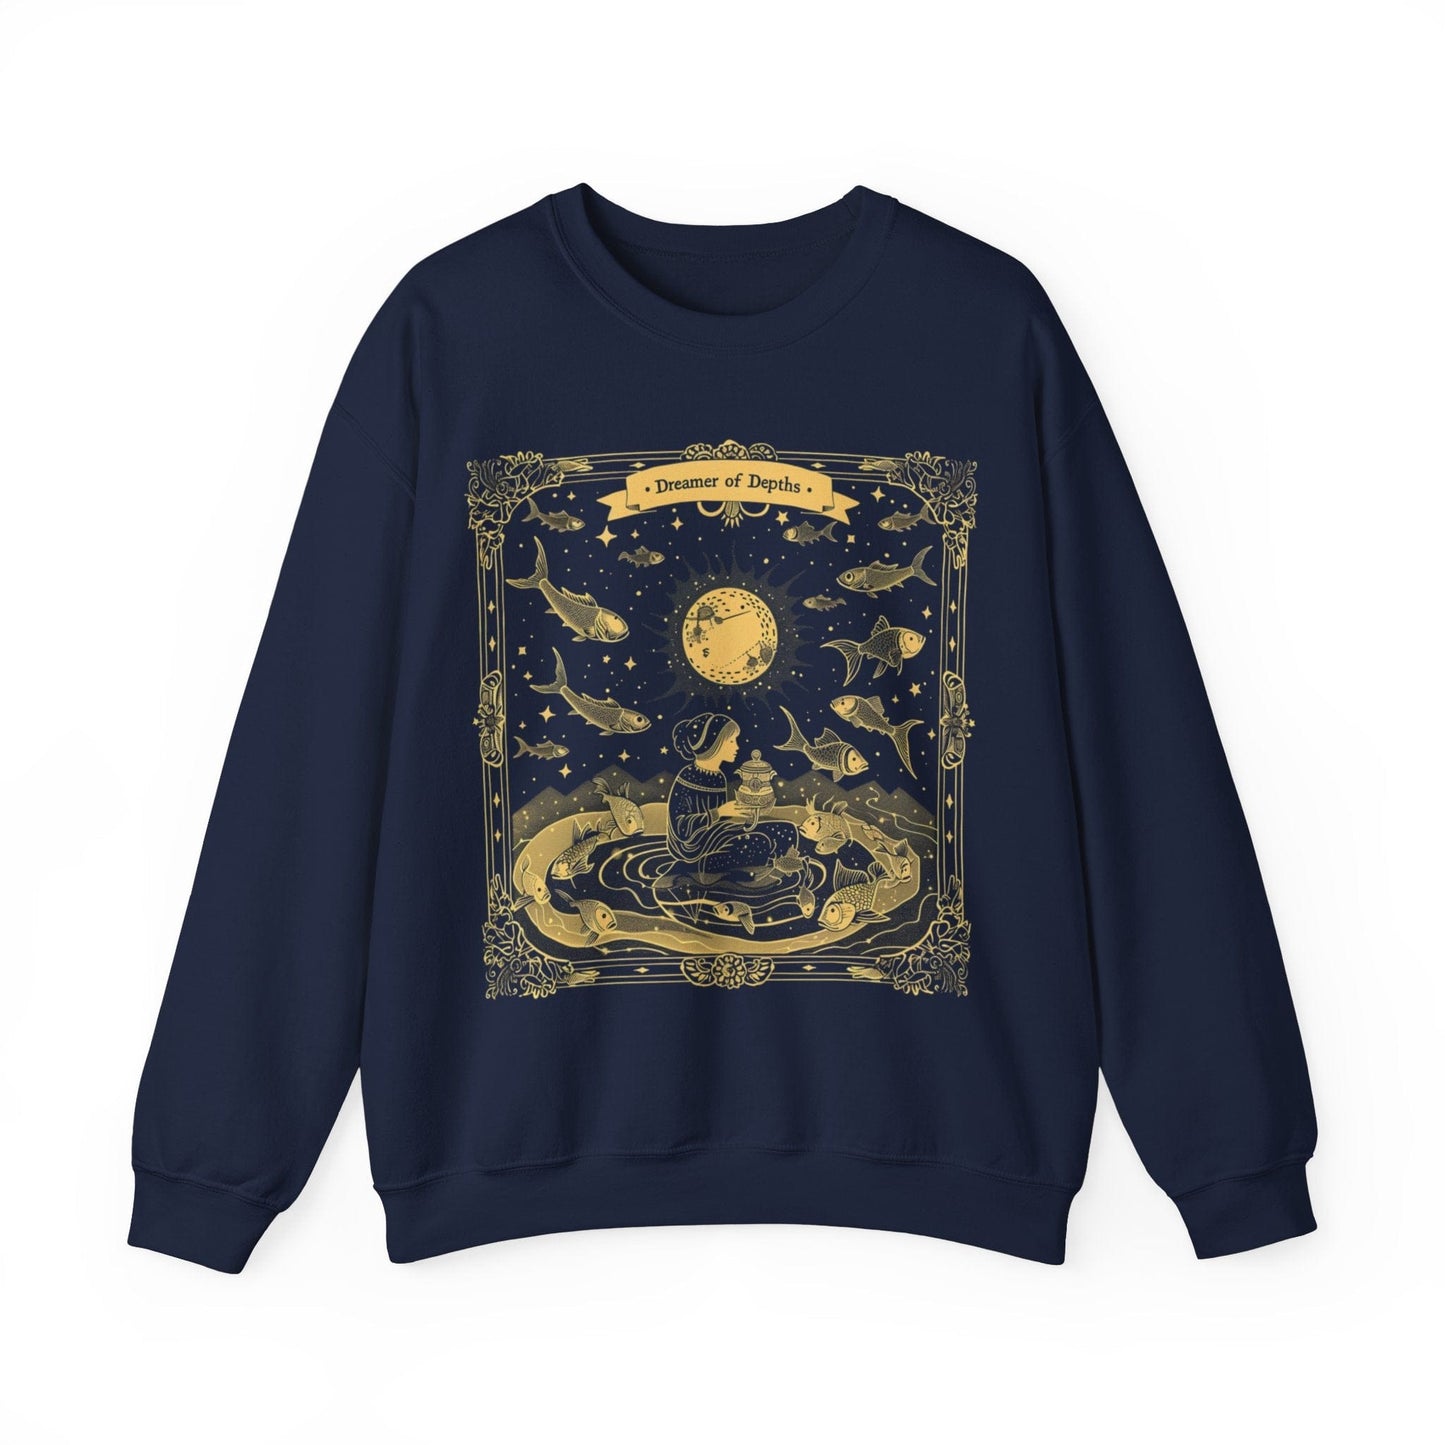 Sweatshirt S / Navy The Dreamer of the Depths Soft Pisces Sweater